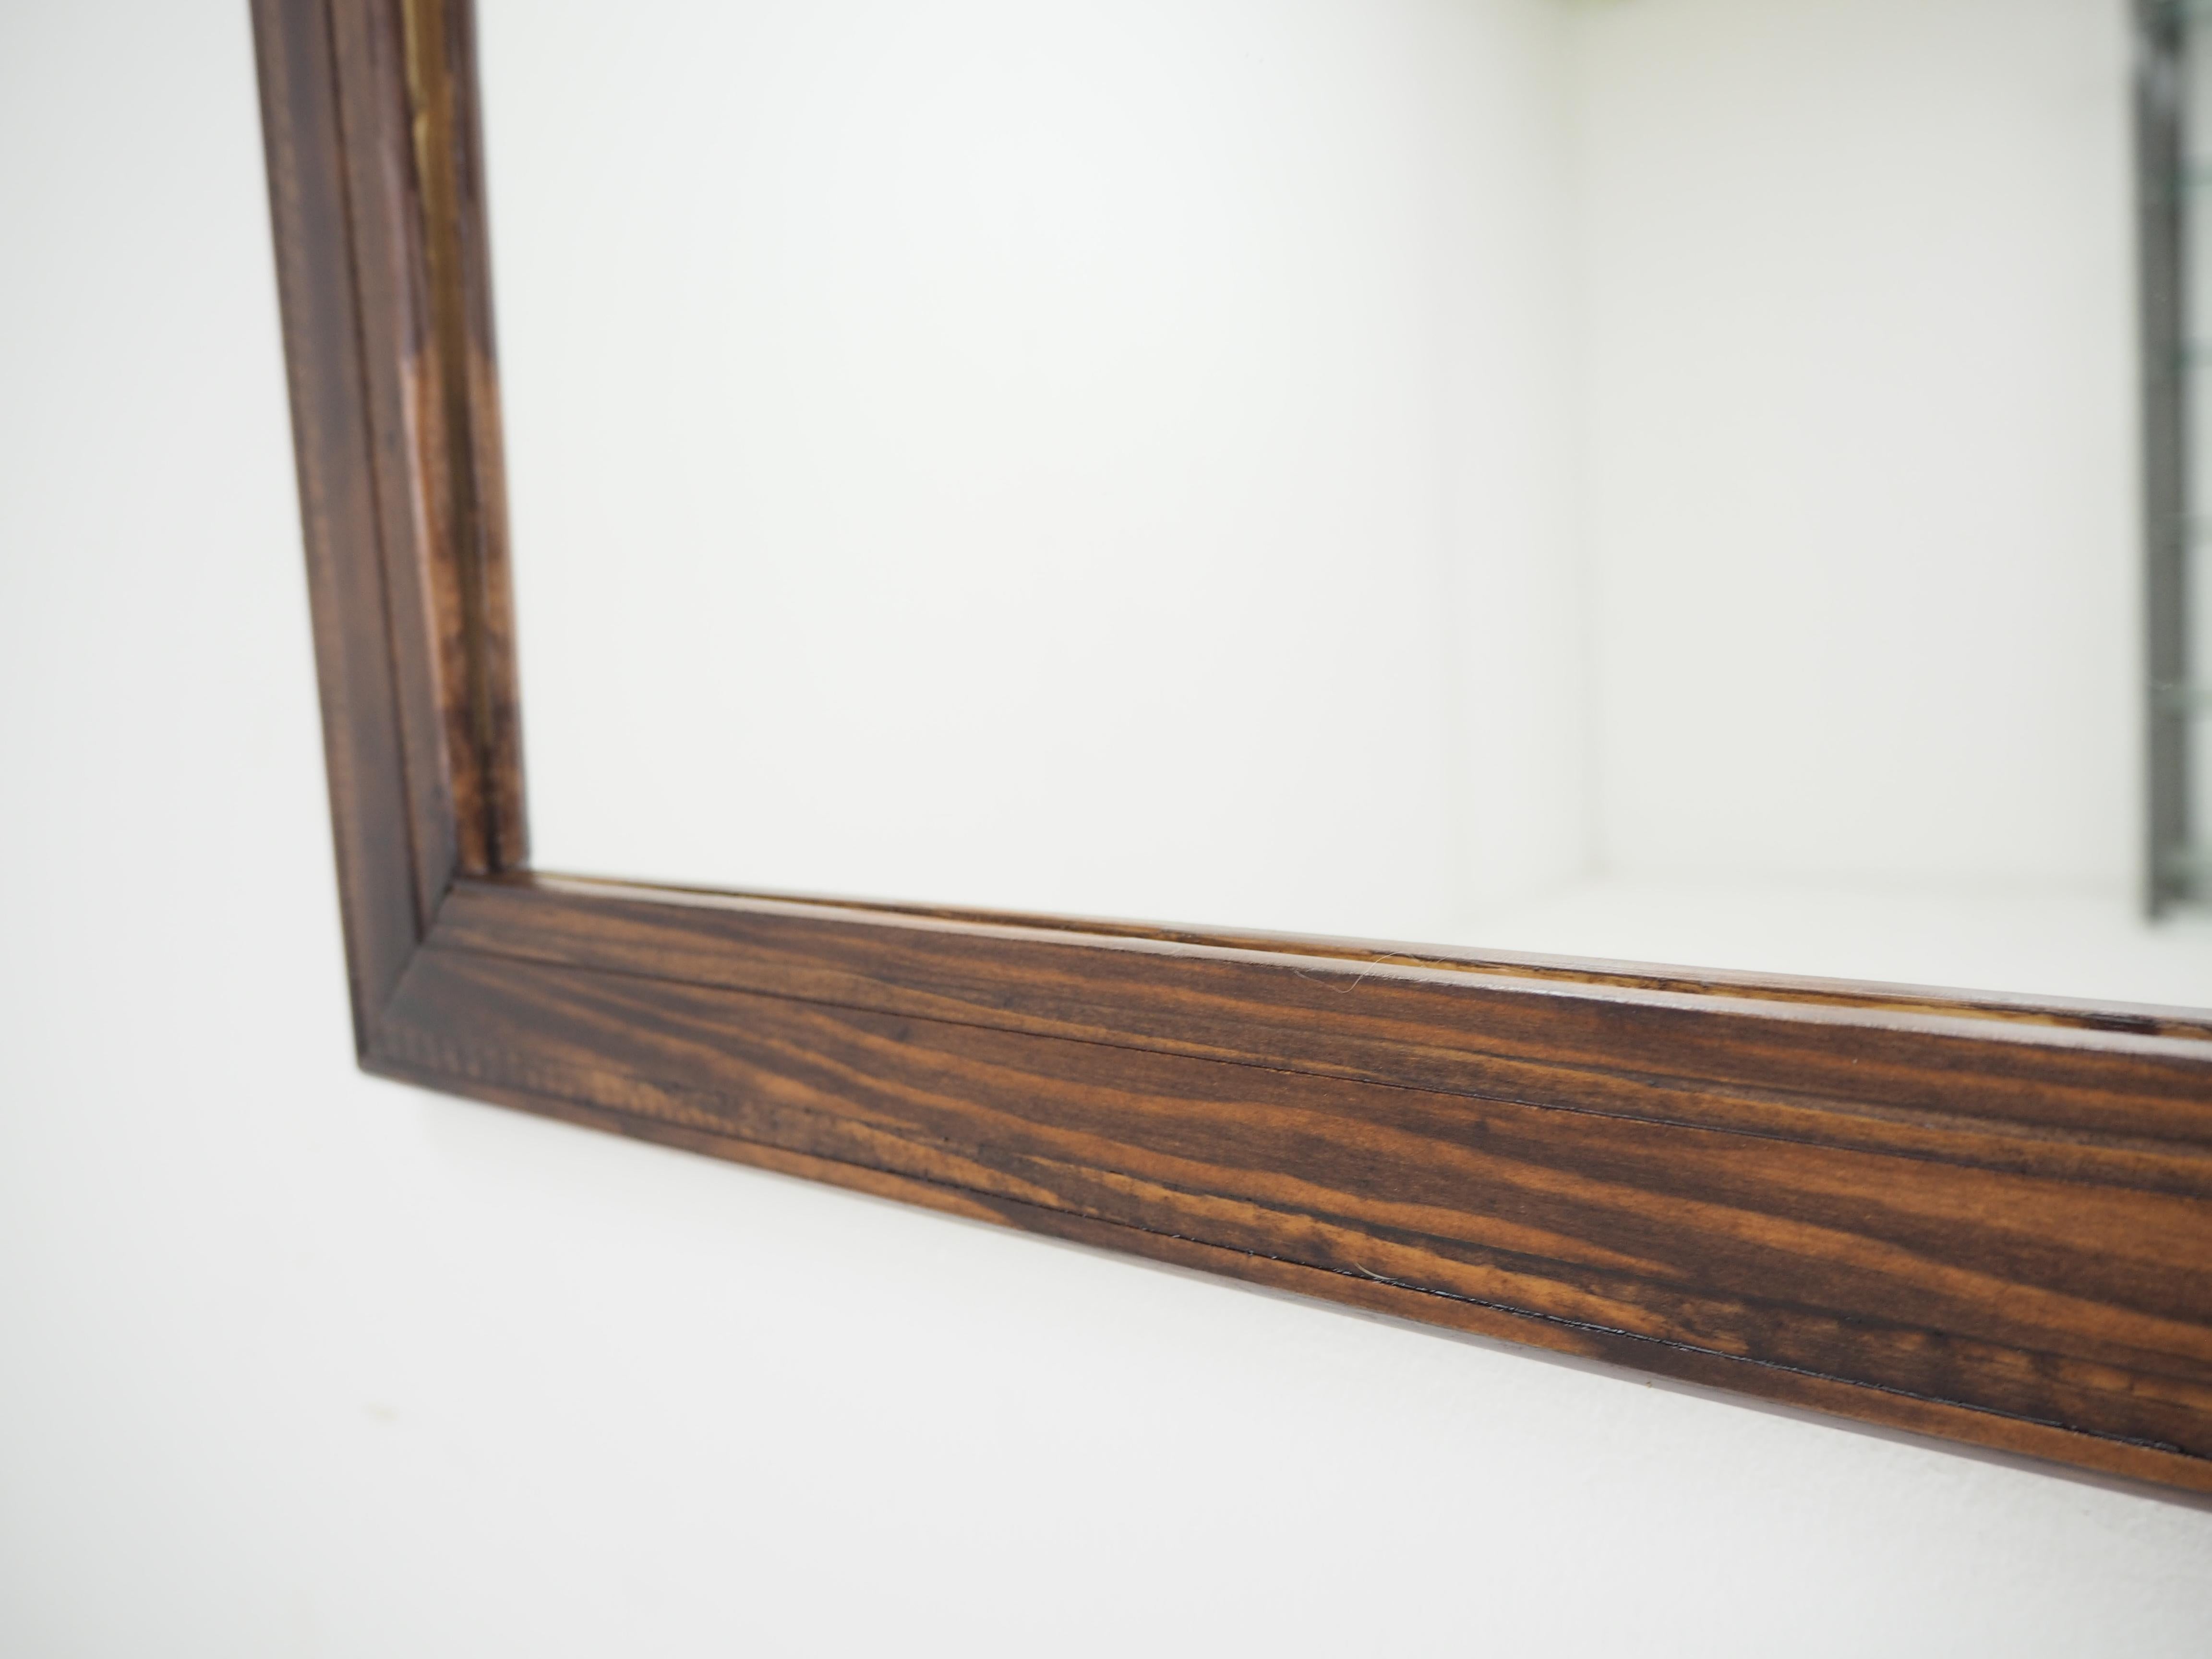 Midcentury Wood Wall Mirror, Europe, 1960s For Sale 3